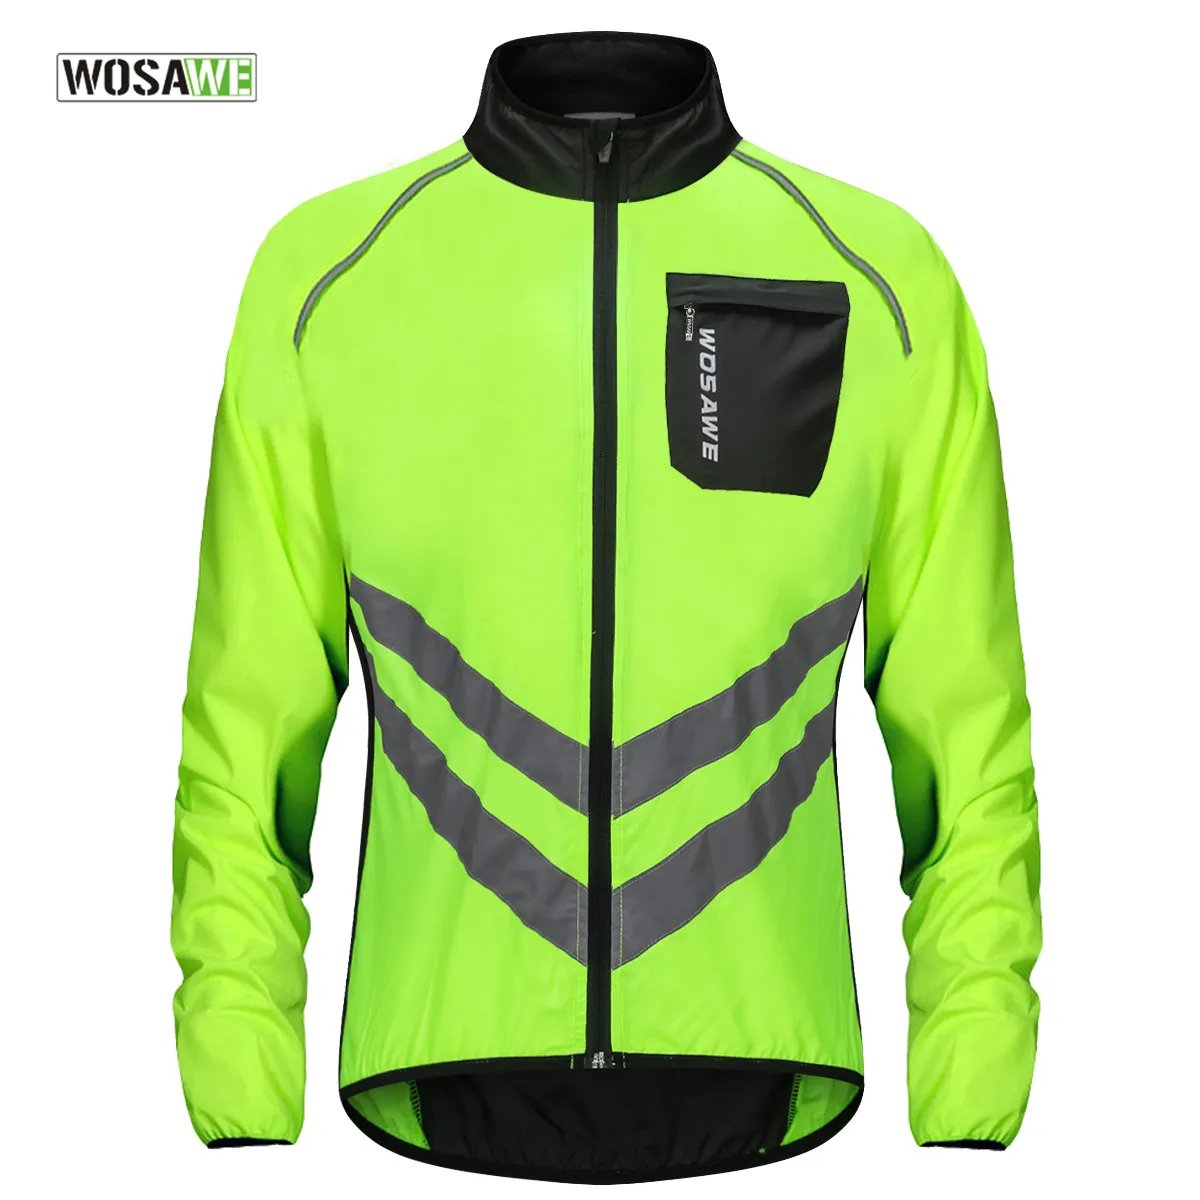 Waterproof Cycling Jackets for Men Women Ladies,Windproof Bicycle Riding Vest Wind Coat Windbreaker with Relective Strap Breathable Mesh,Cycling Accessories